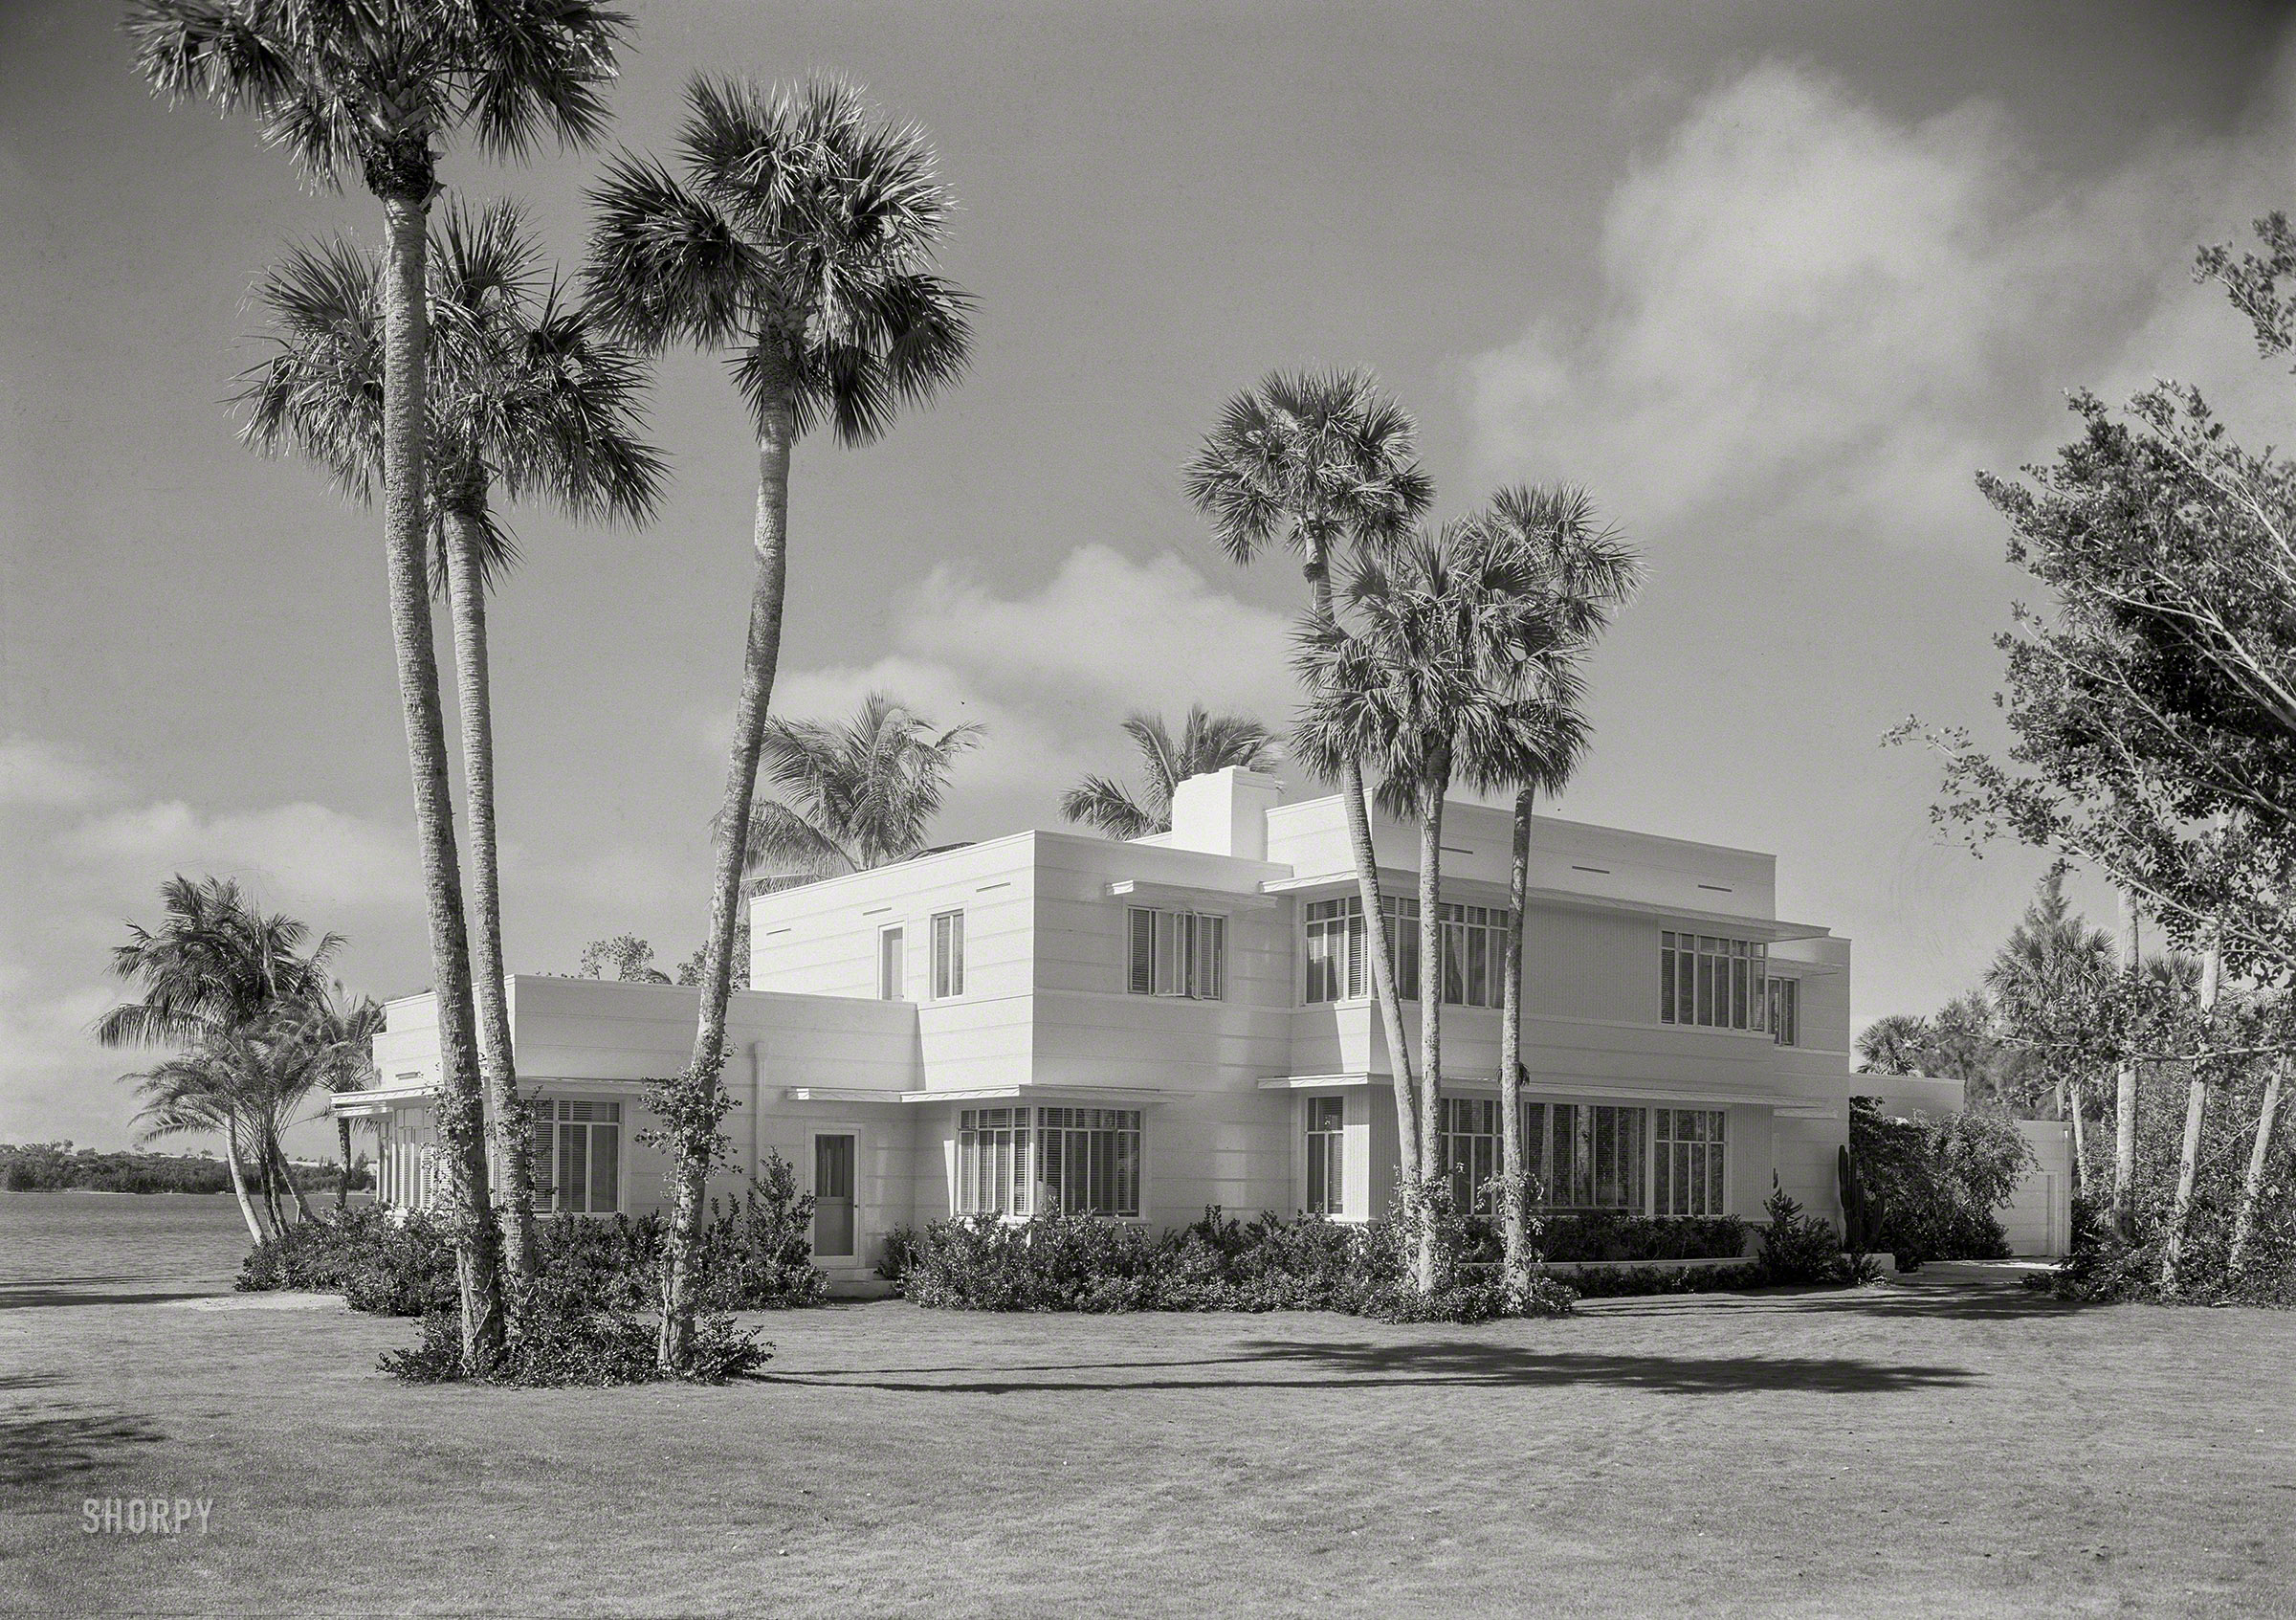 January 13, 1940. "Charles S. Payson residence in Hobe Sound, Florida. Entrance facade, horizontal, windows closed. Beatrice Stewart Inc., decorator. Treanor & Fatio, architect." 5x7 acetate negative by Gottscho-Schleisner. View full size.